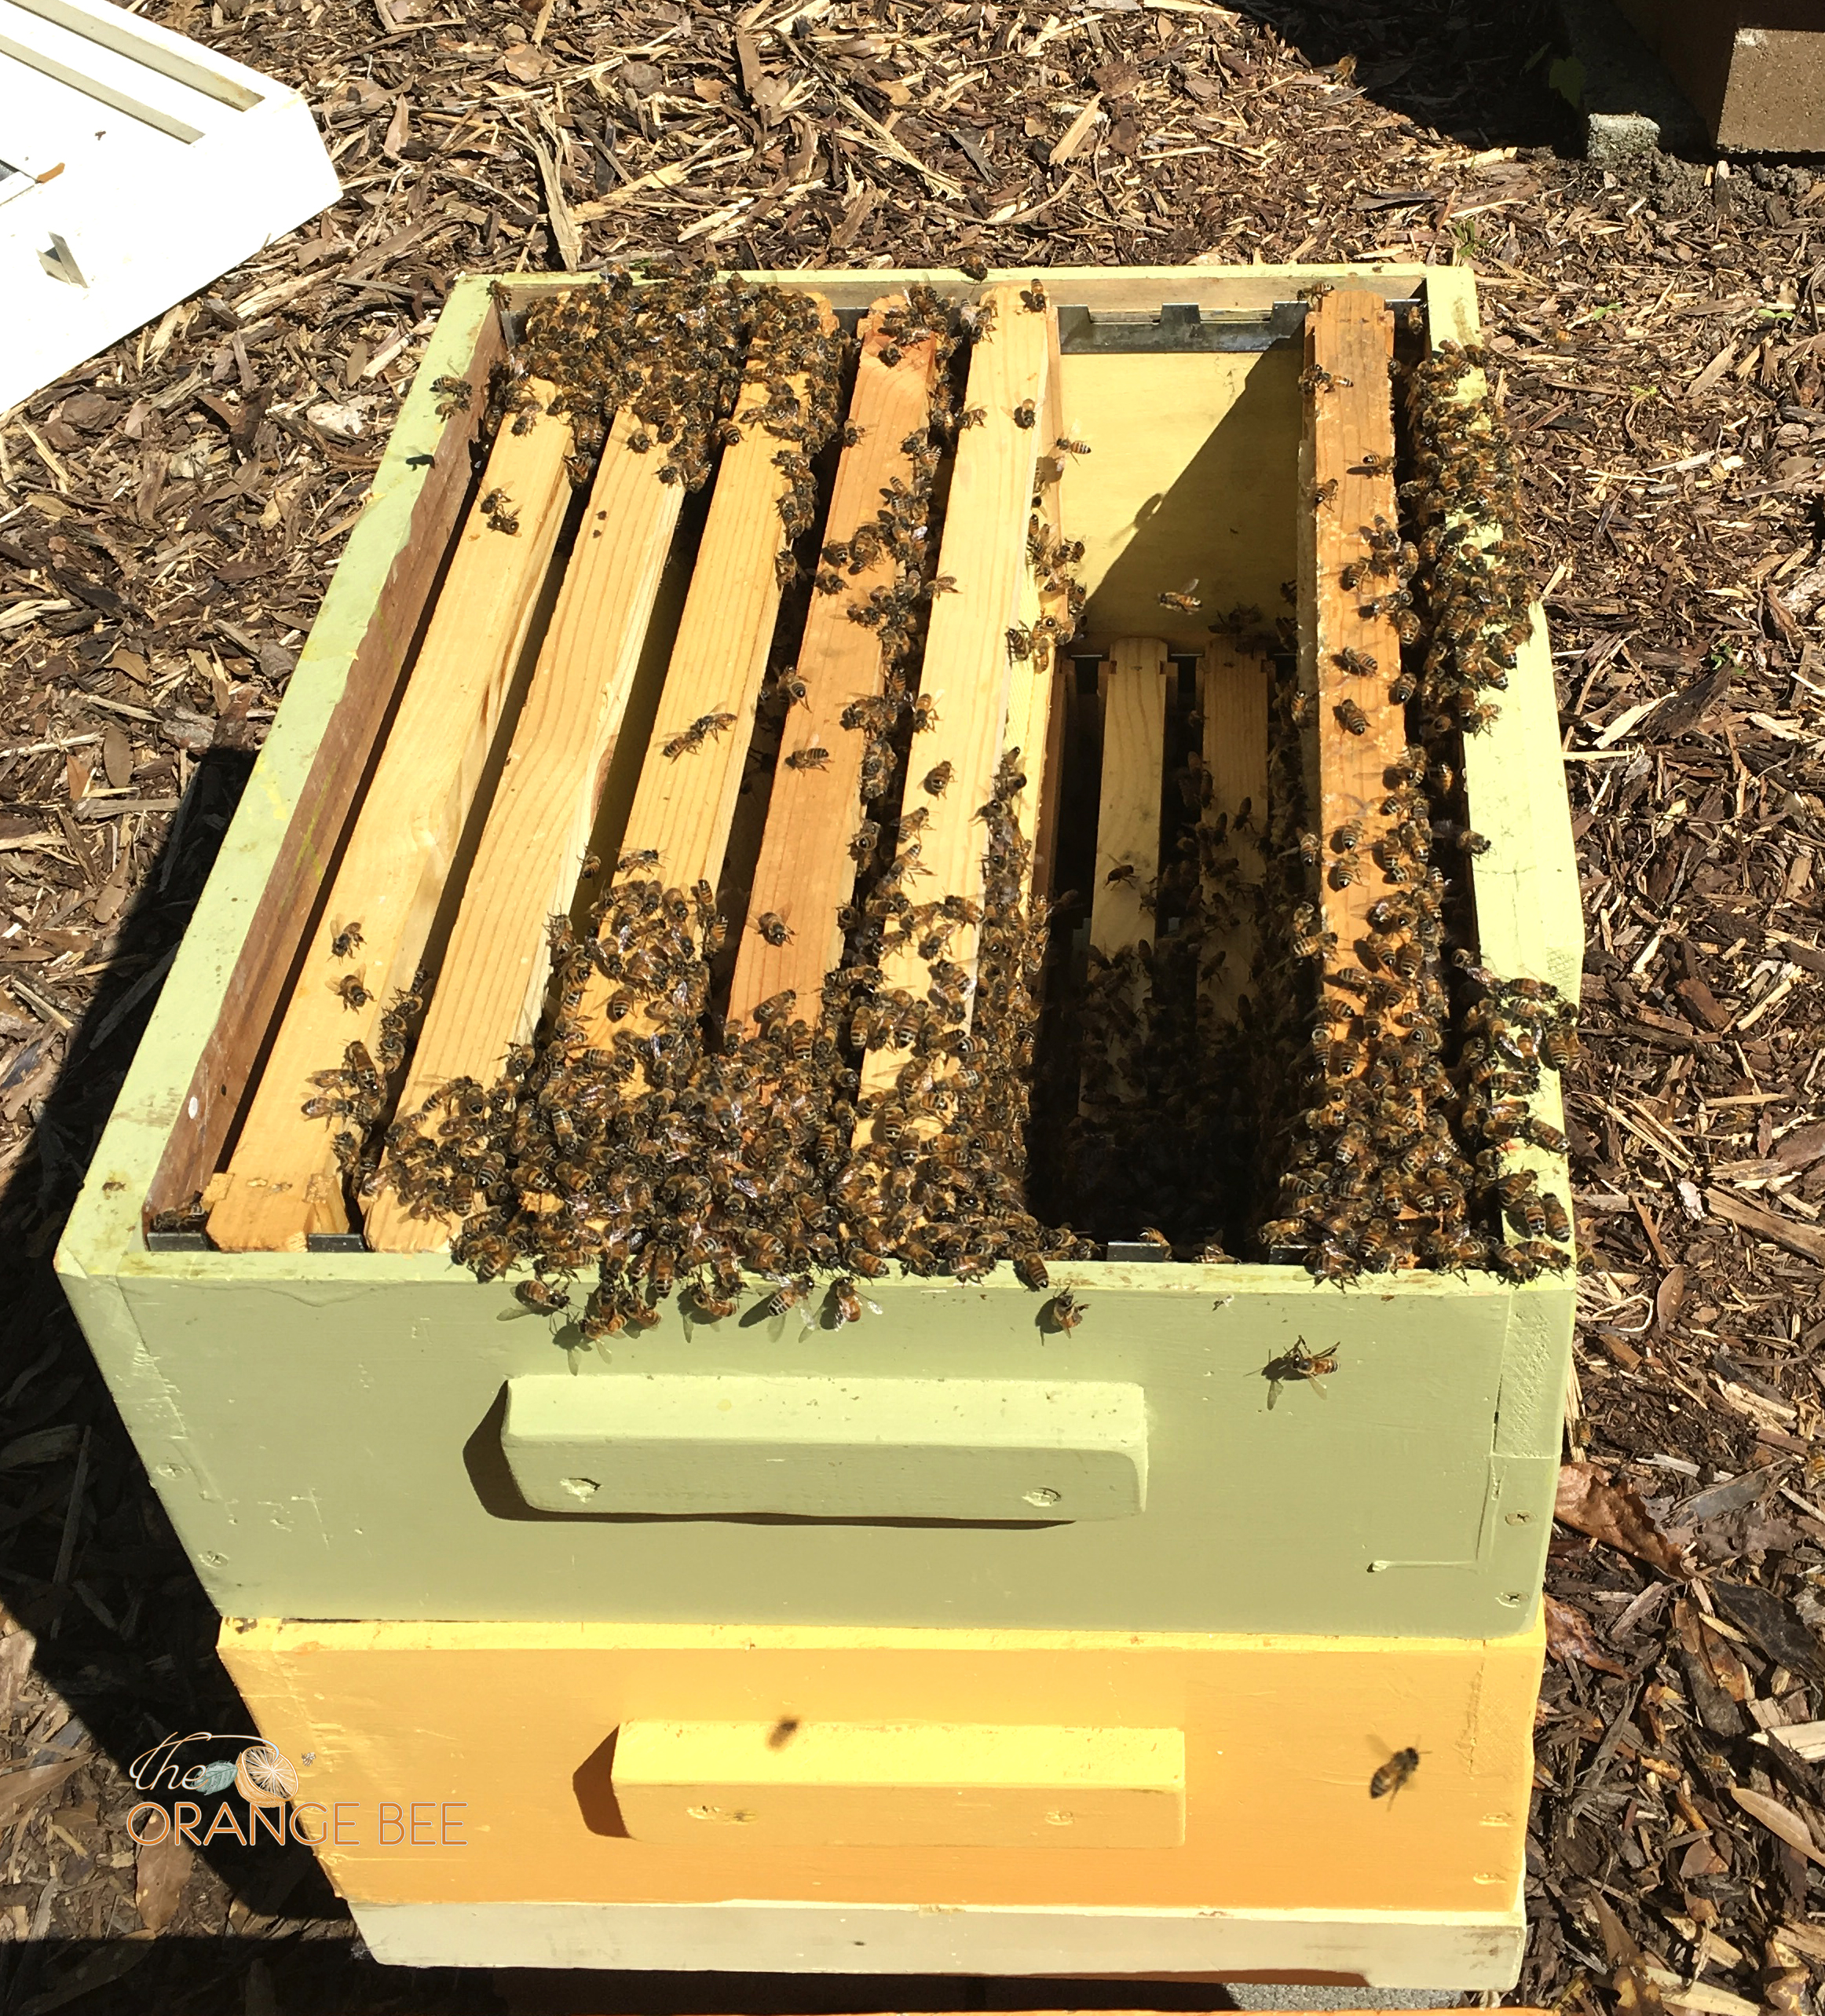 Bees are gathering inside their new hive.